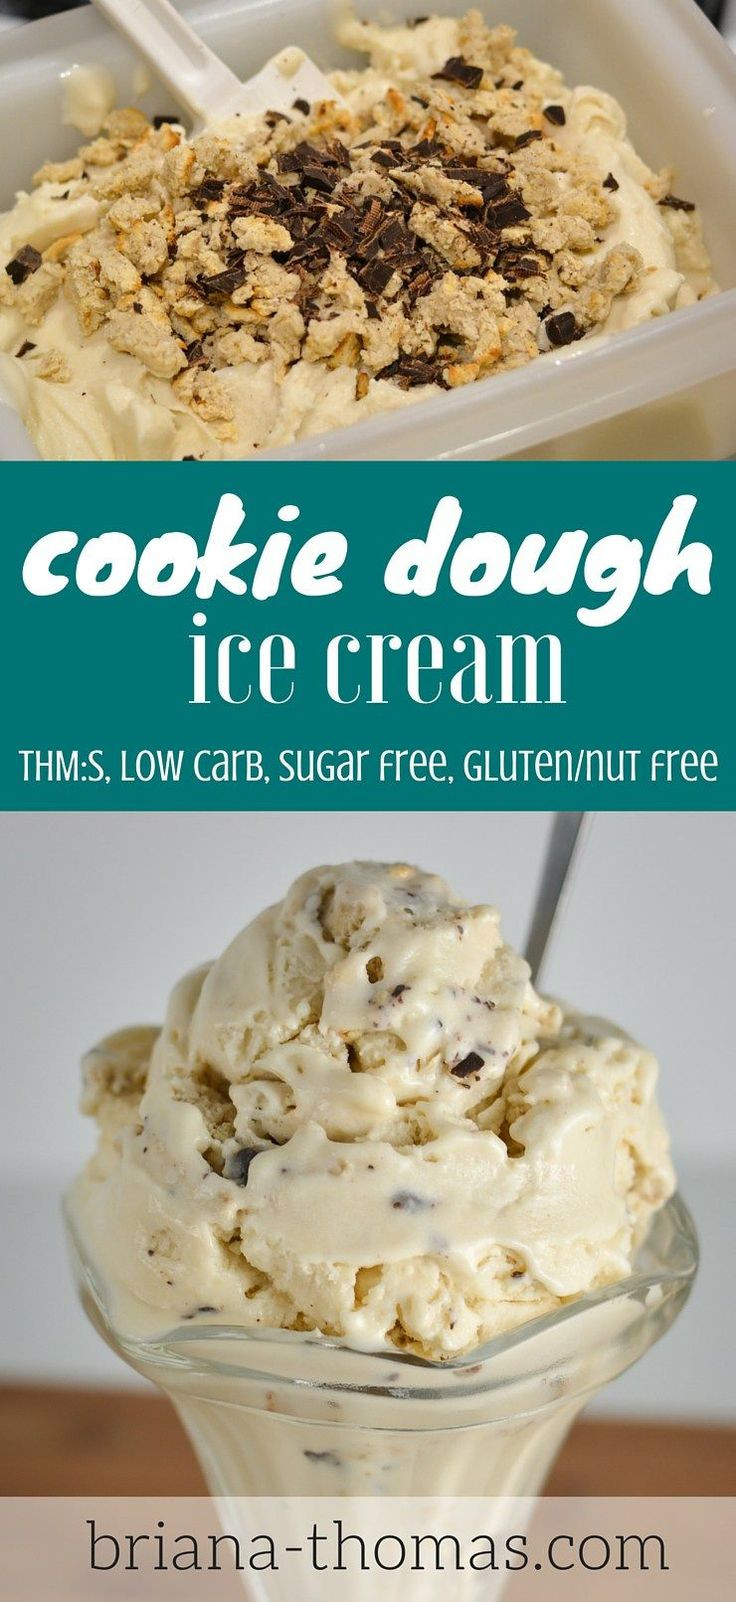 Healthy Low Carb Desserts
 Best 25 Cuisinart Ice Cream Recipes ideas on Pinterest